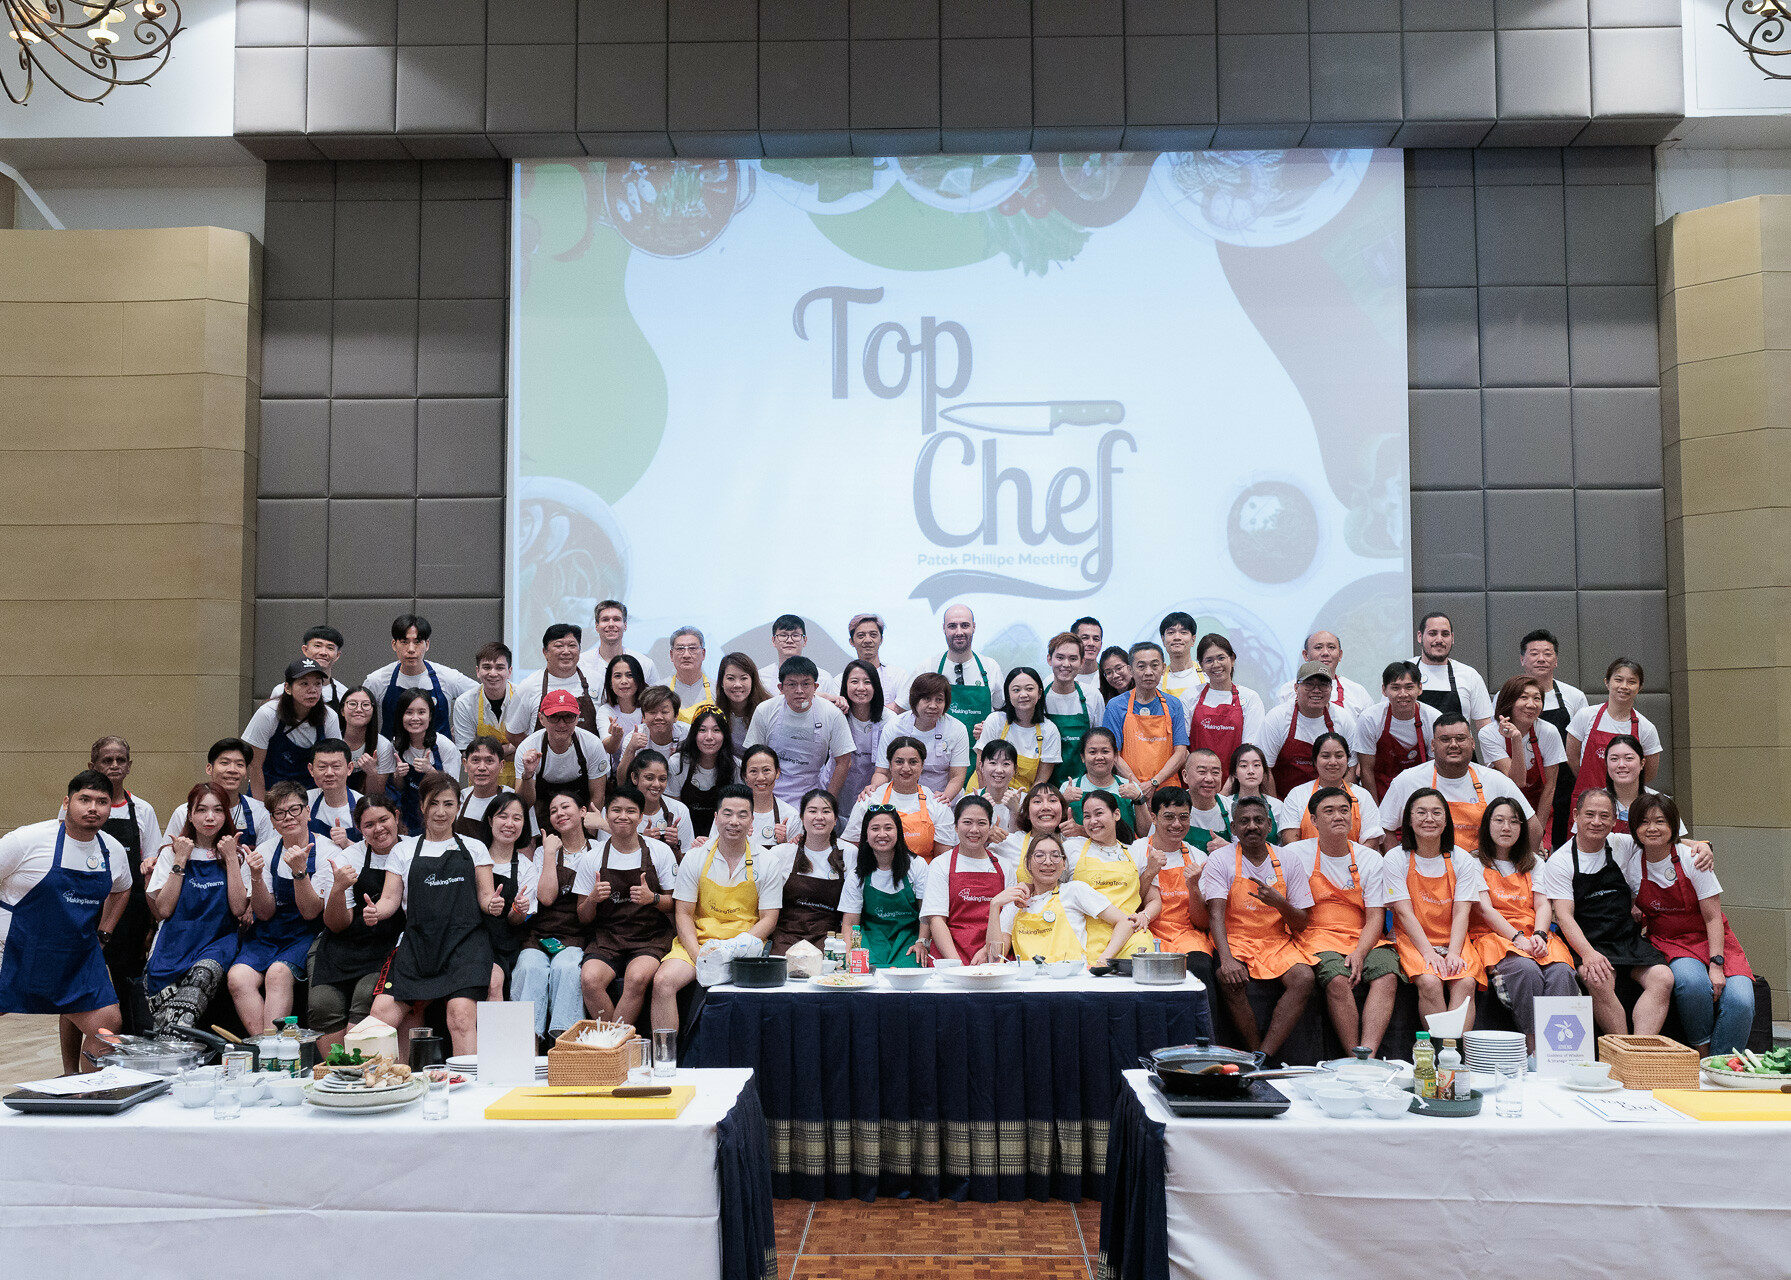 Top Chef is a highly interactive and fun team-building event vaguely based on the US TV series Top Chef